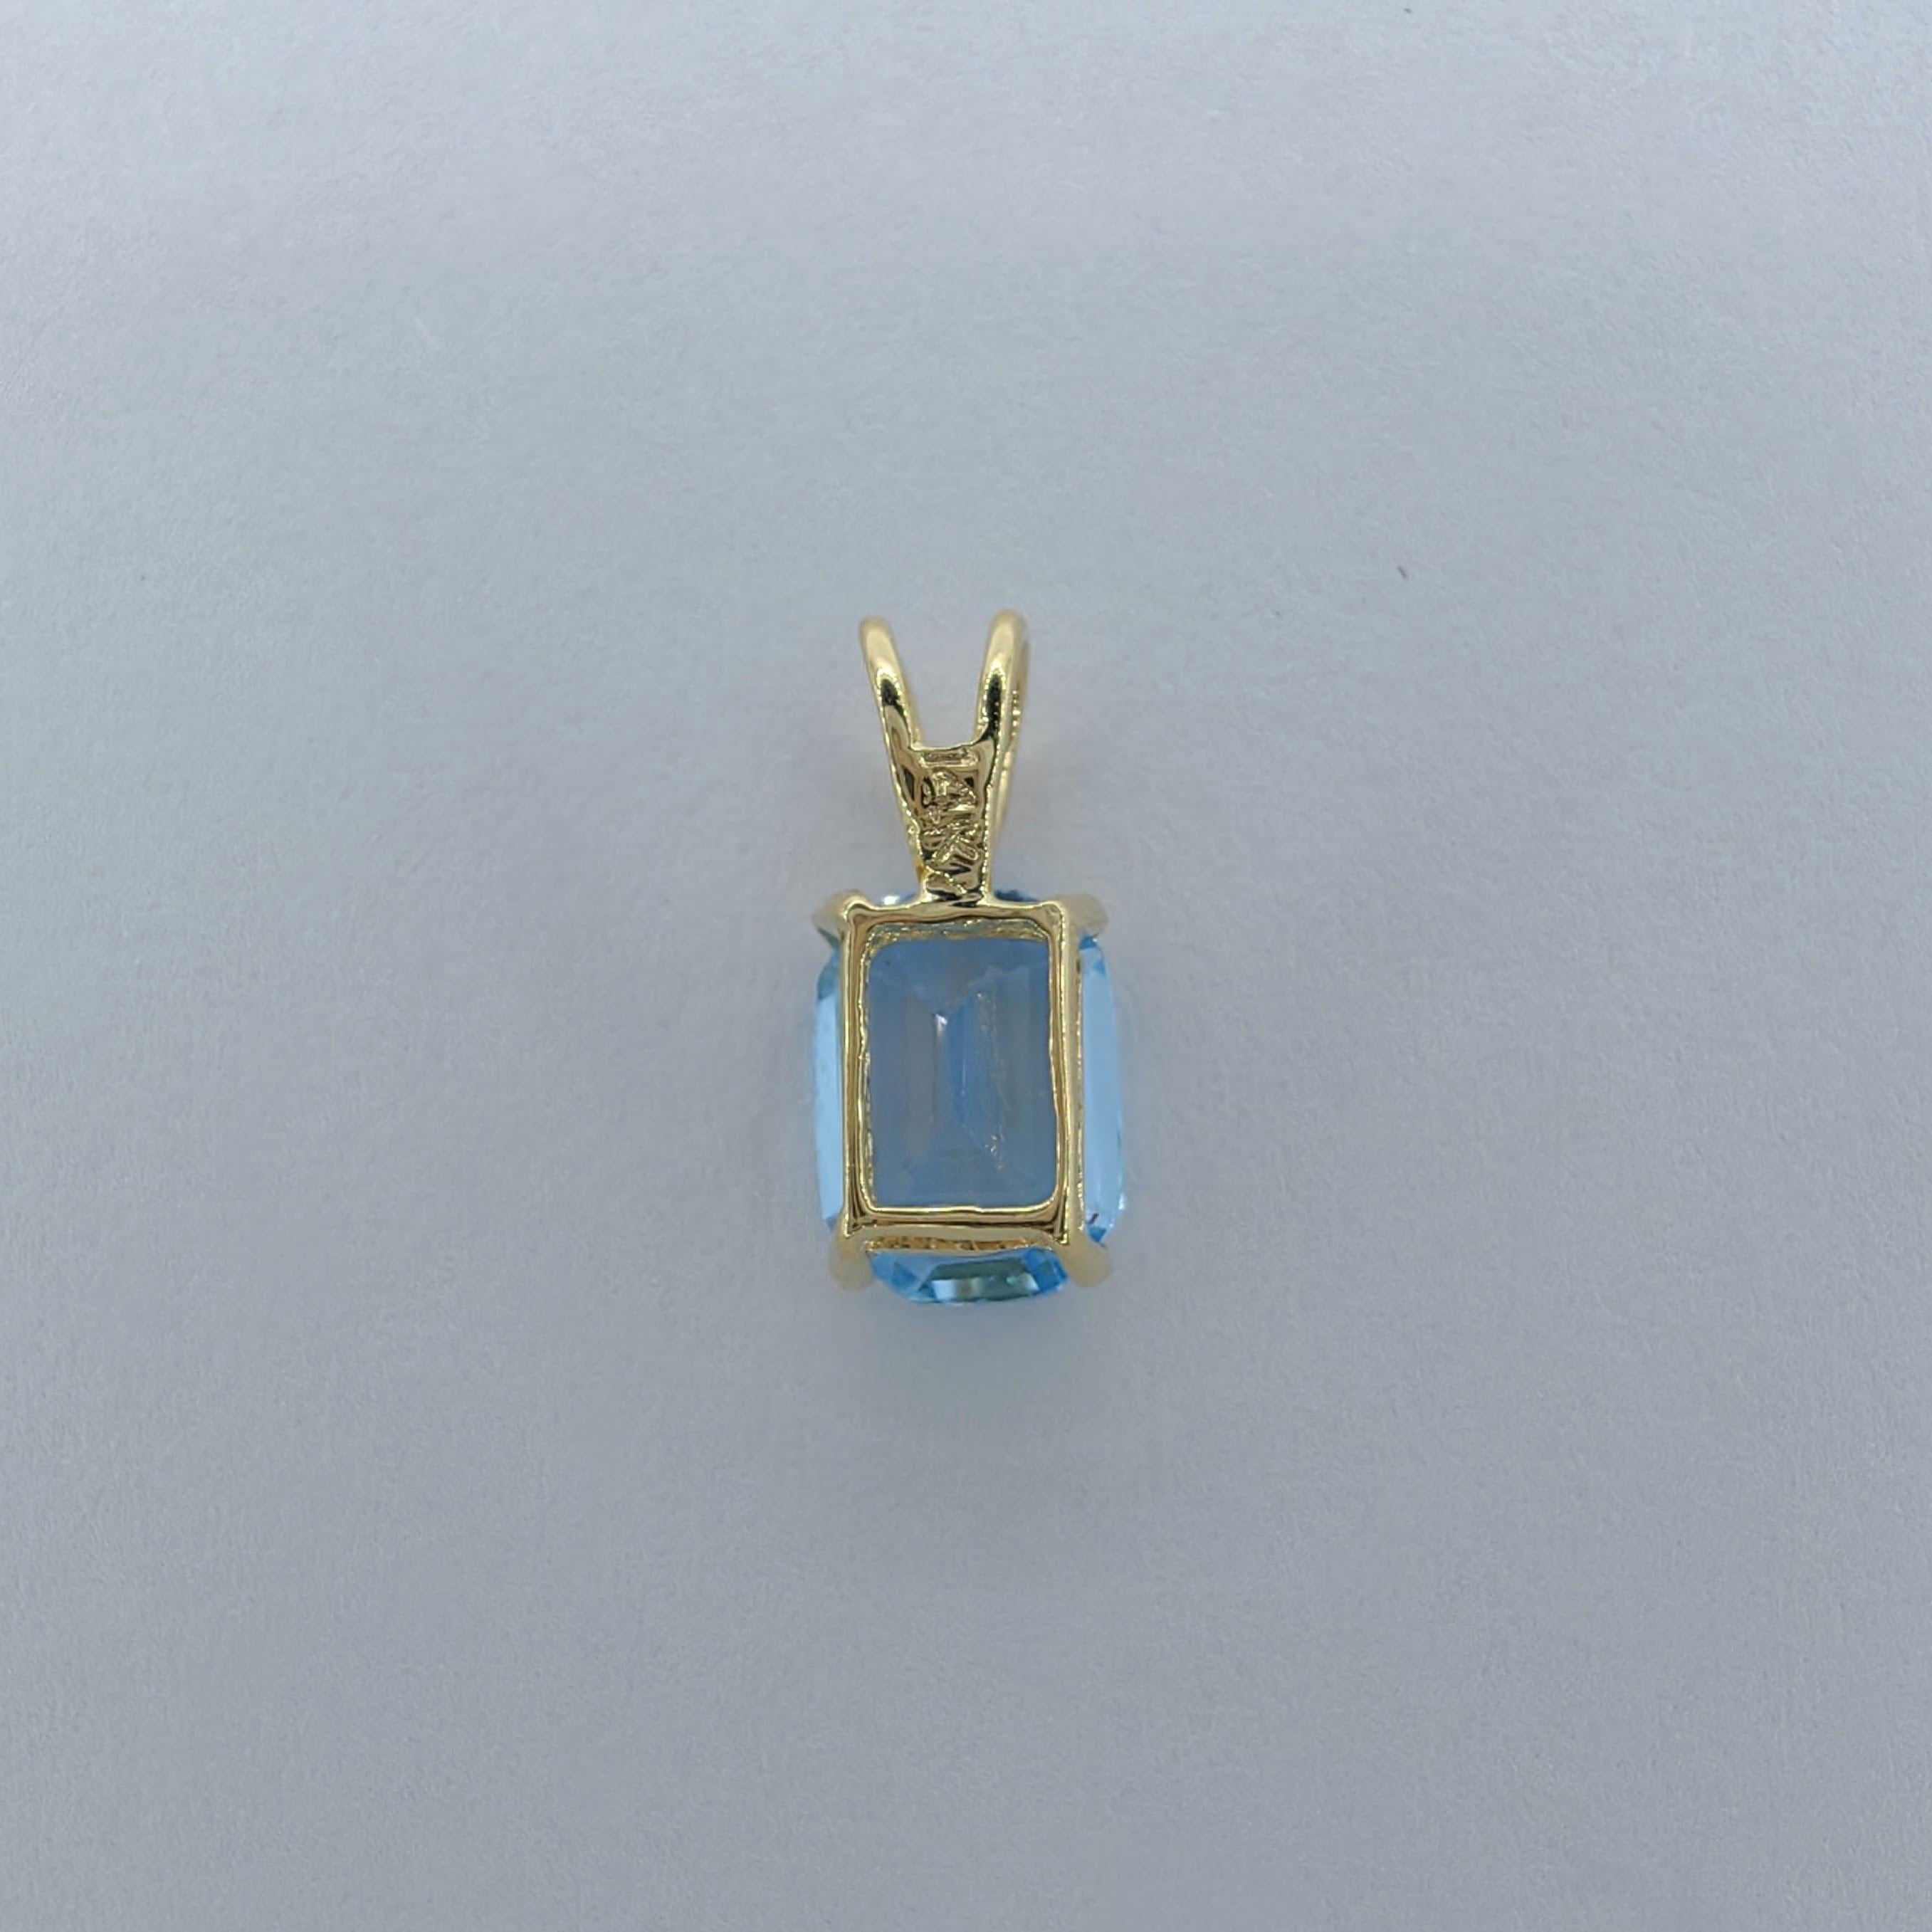 Vintage 1980's Emerald Cut Blue Topaz Necklace Pendant in 14K Yellow Gold #2 For Sale 2